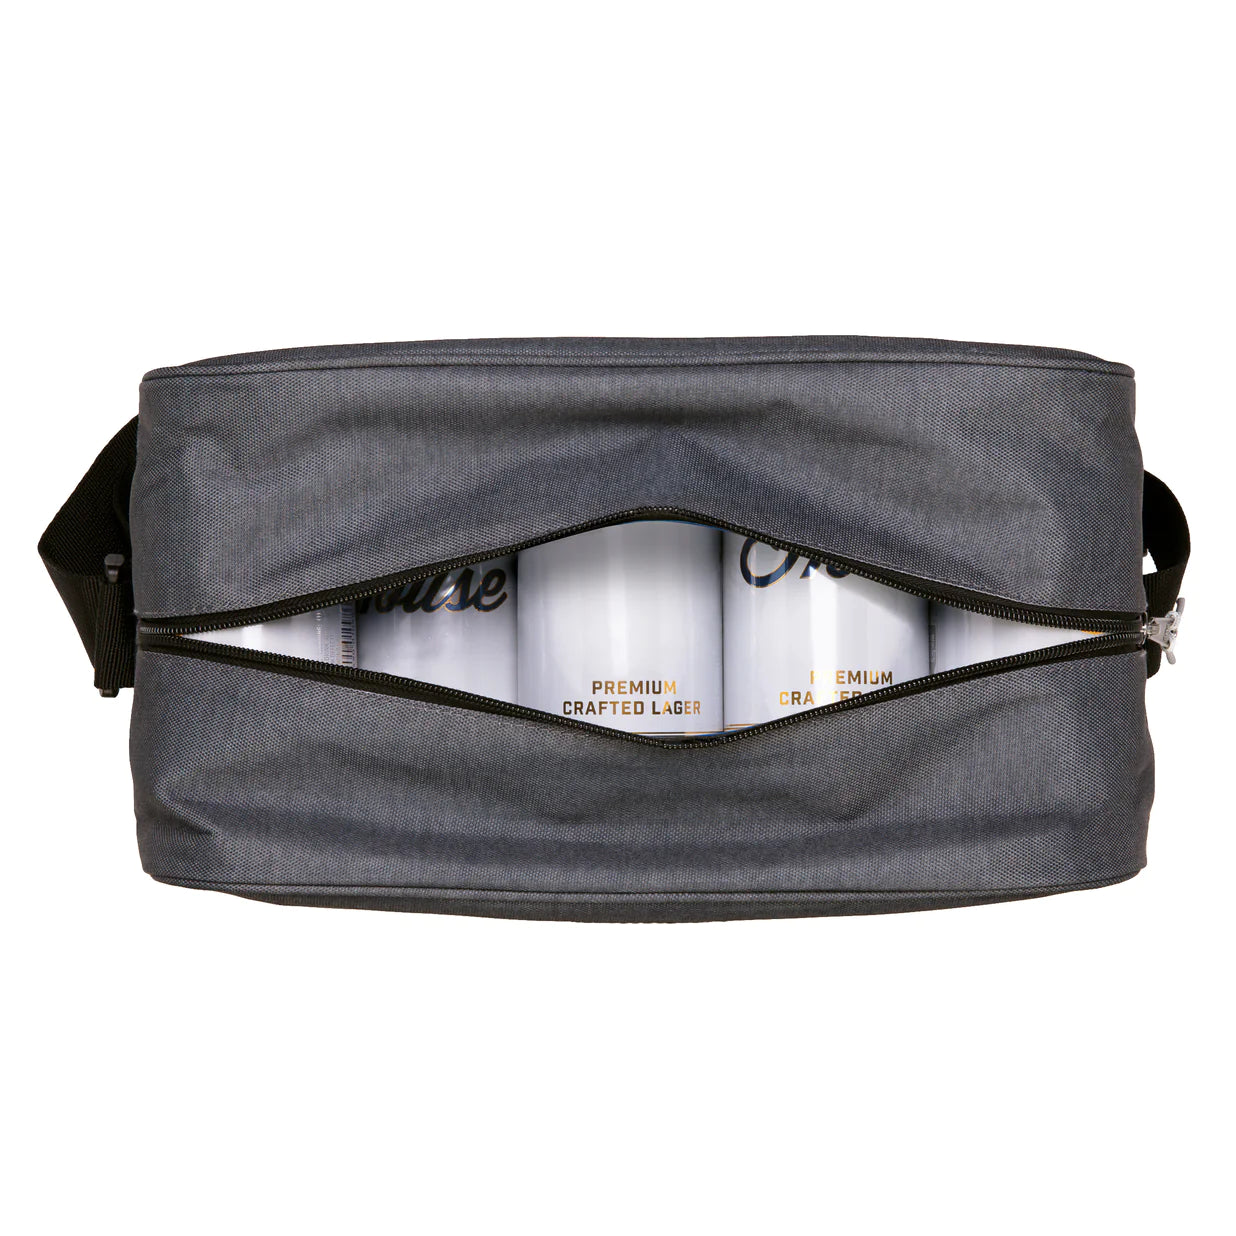 ERGO Packit Zuma 15can Cooler Bag | Buy at The Green Collective